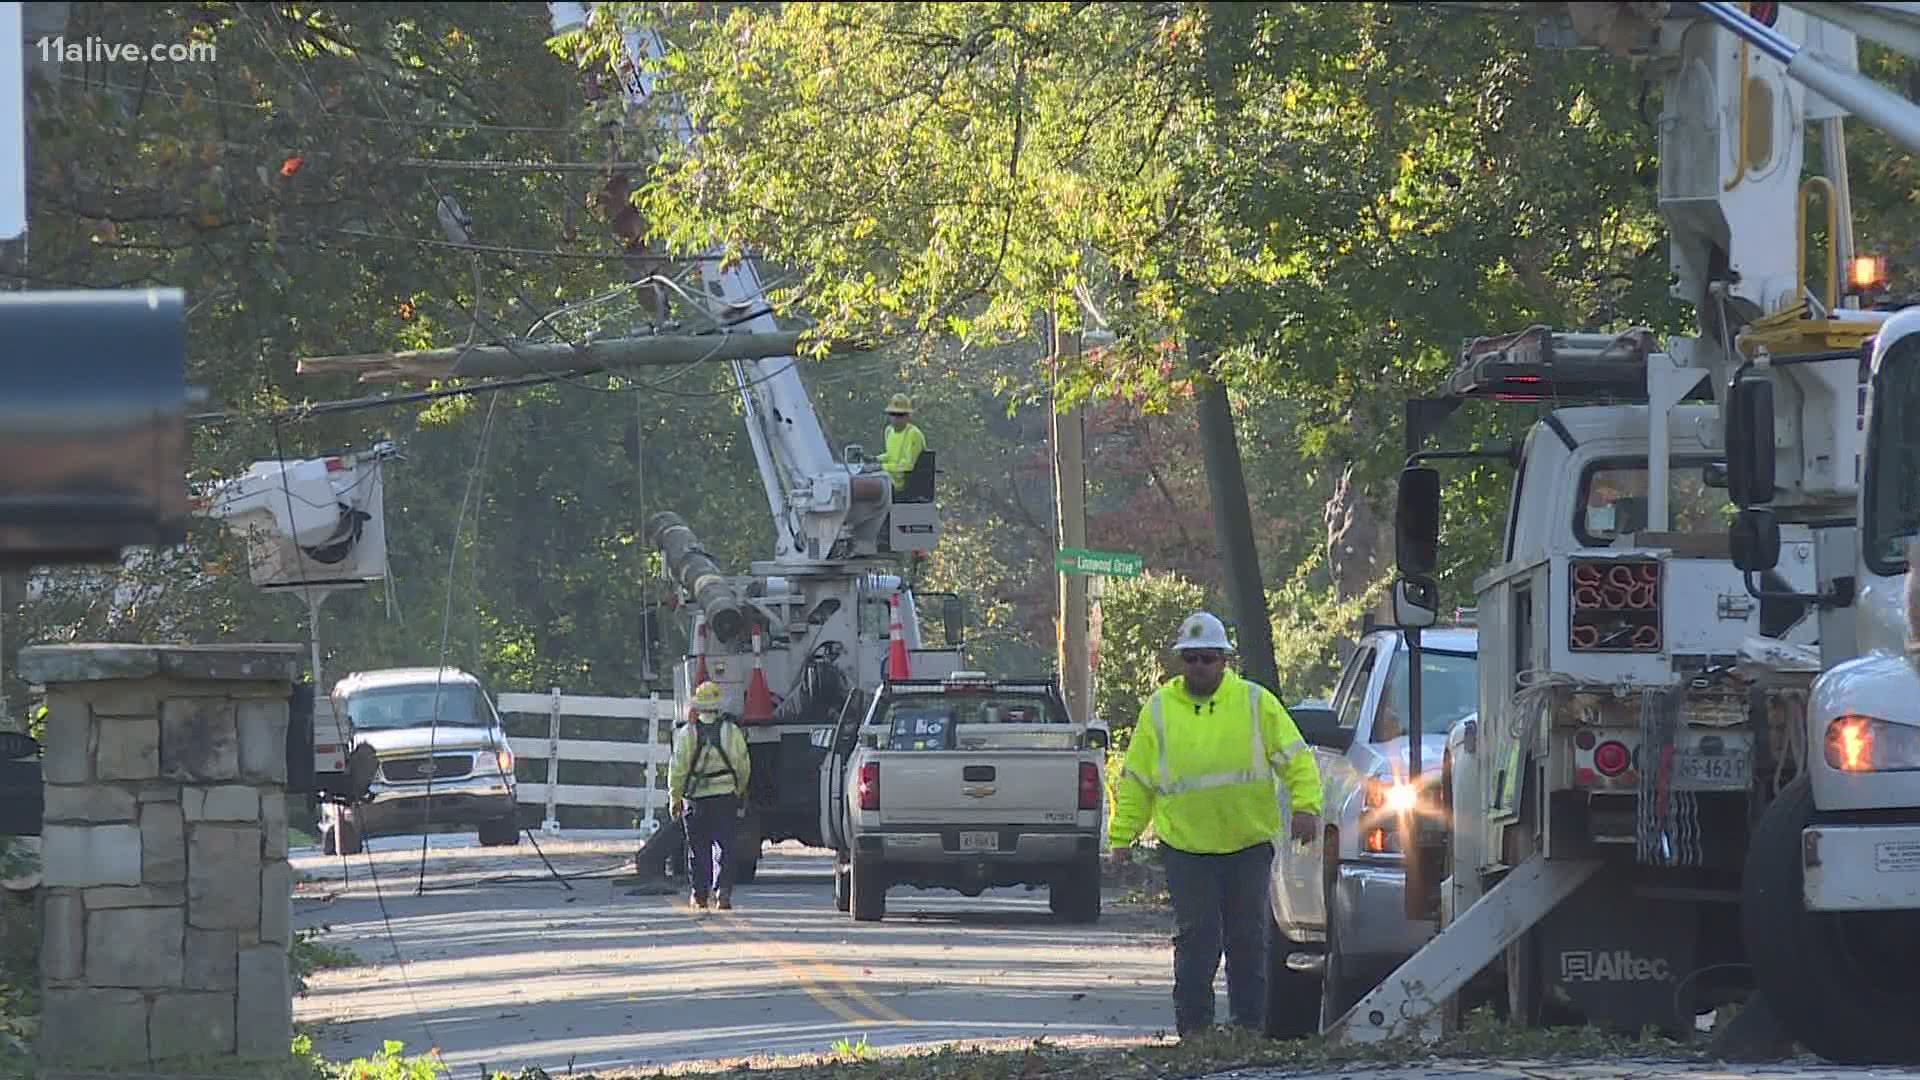 One of the hardest-hit neighborhoods, near Windy Hill Road and South Cobb Drive, still has no power. On Friday, there were power crews working in the neighborhood.